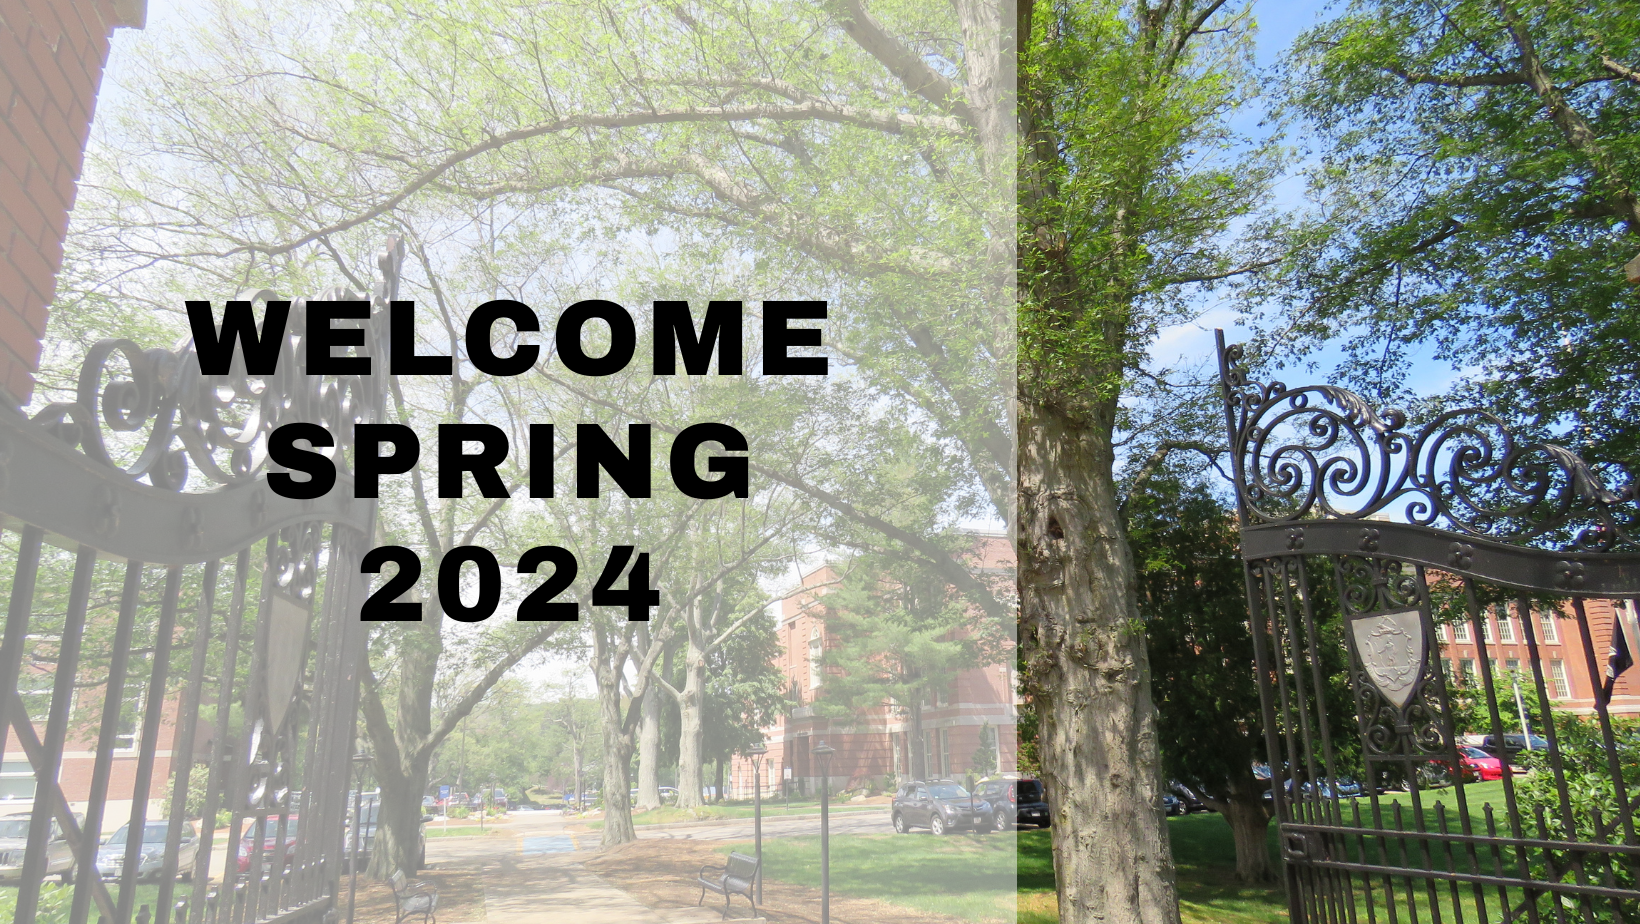 Welcome Spring 2024!